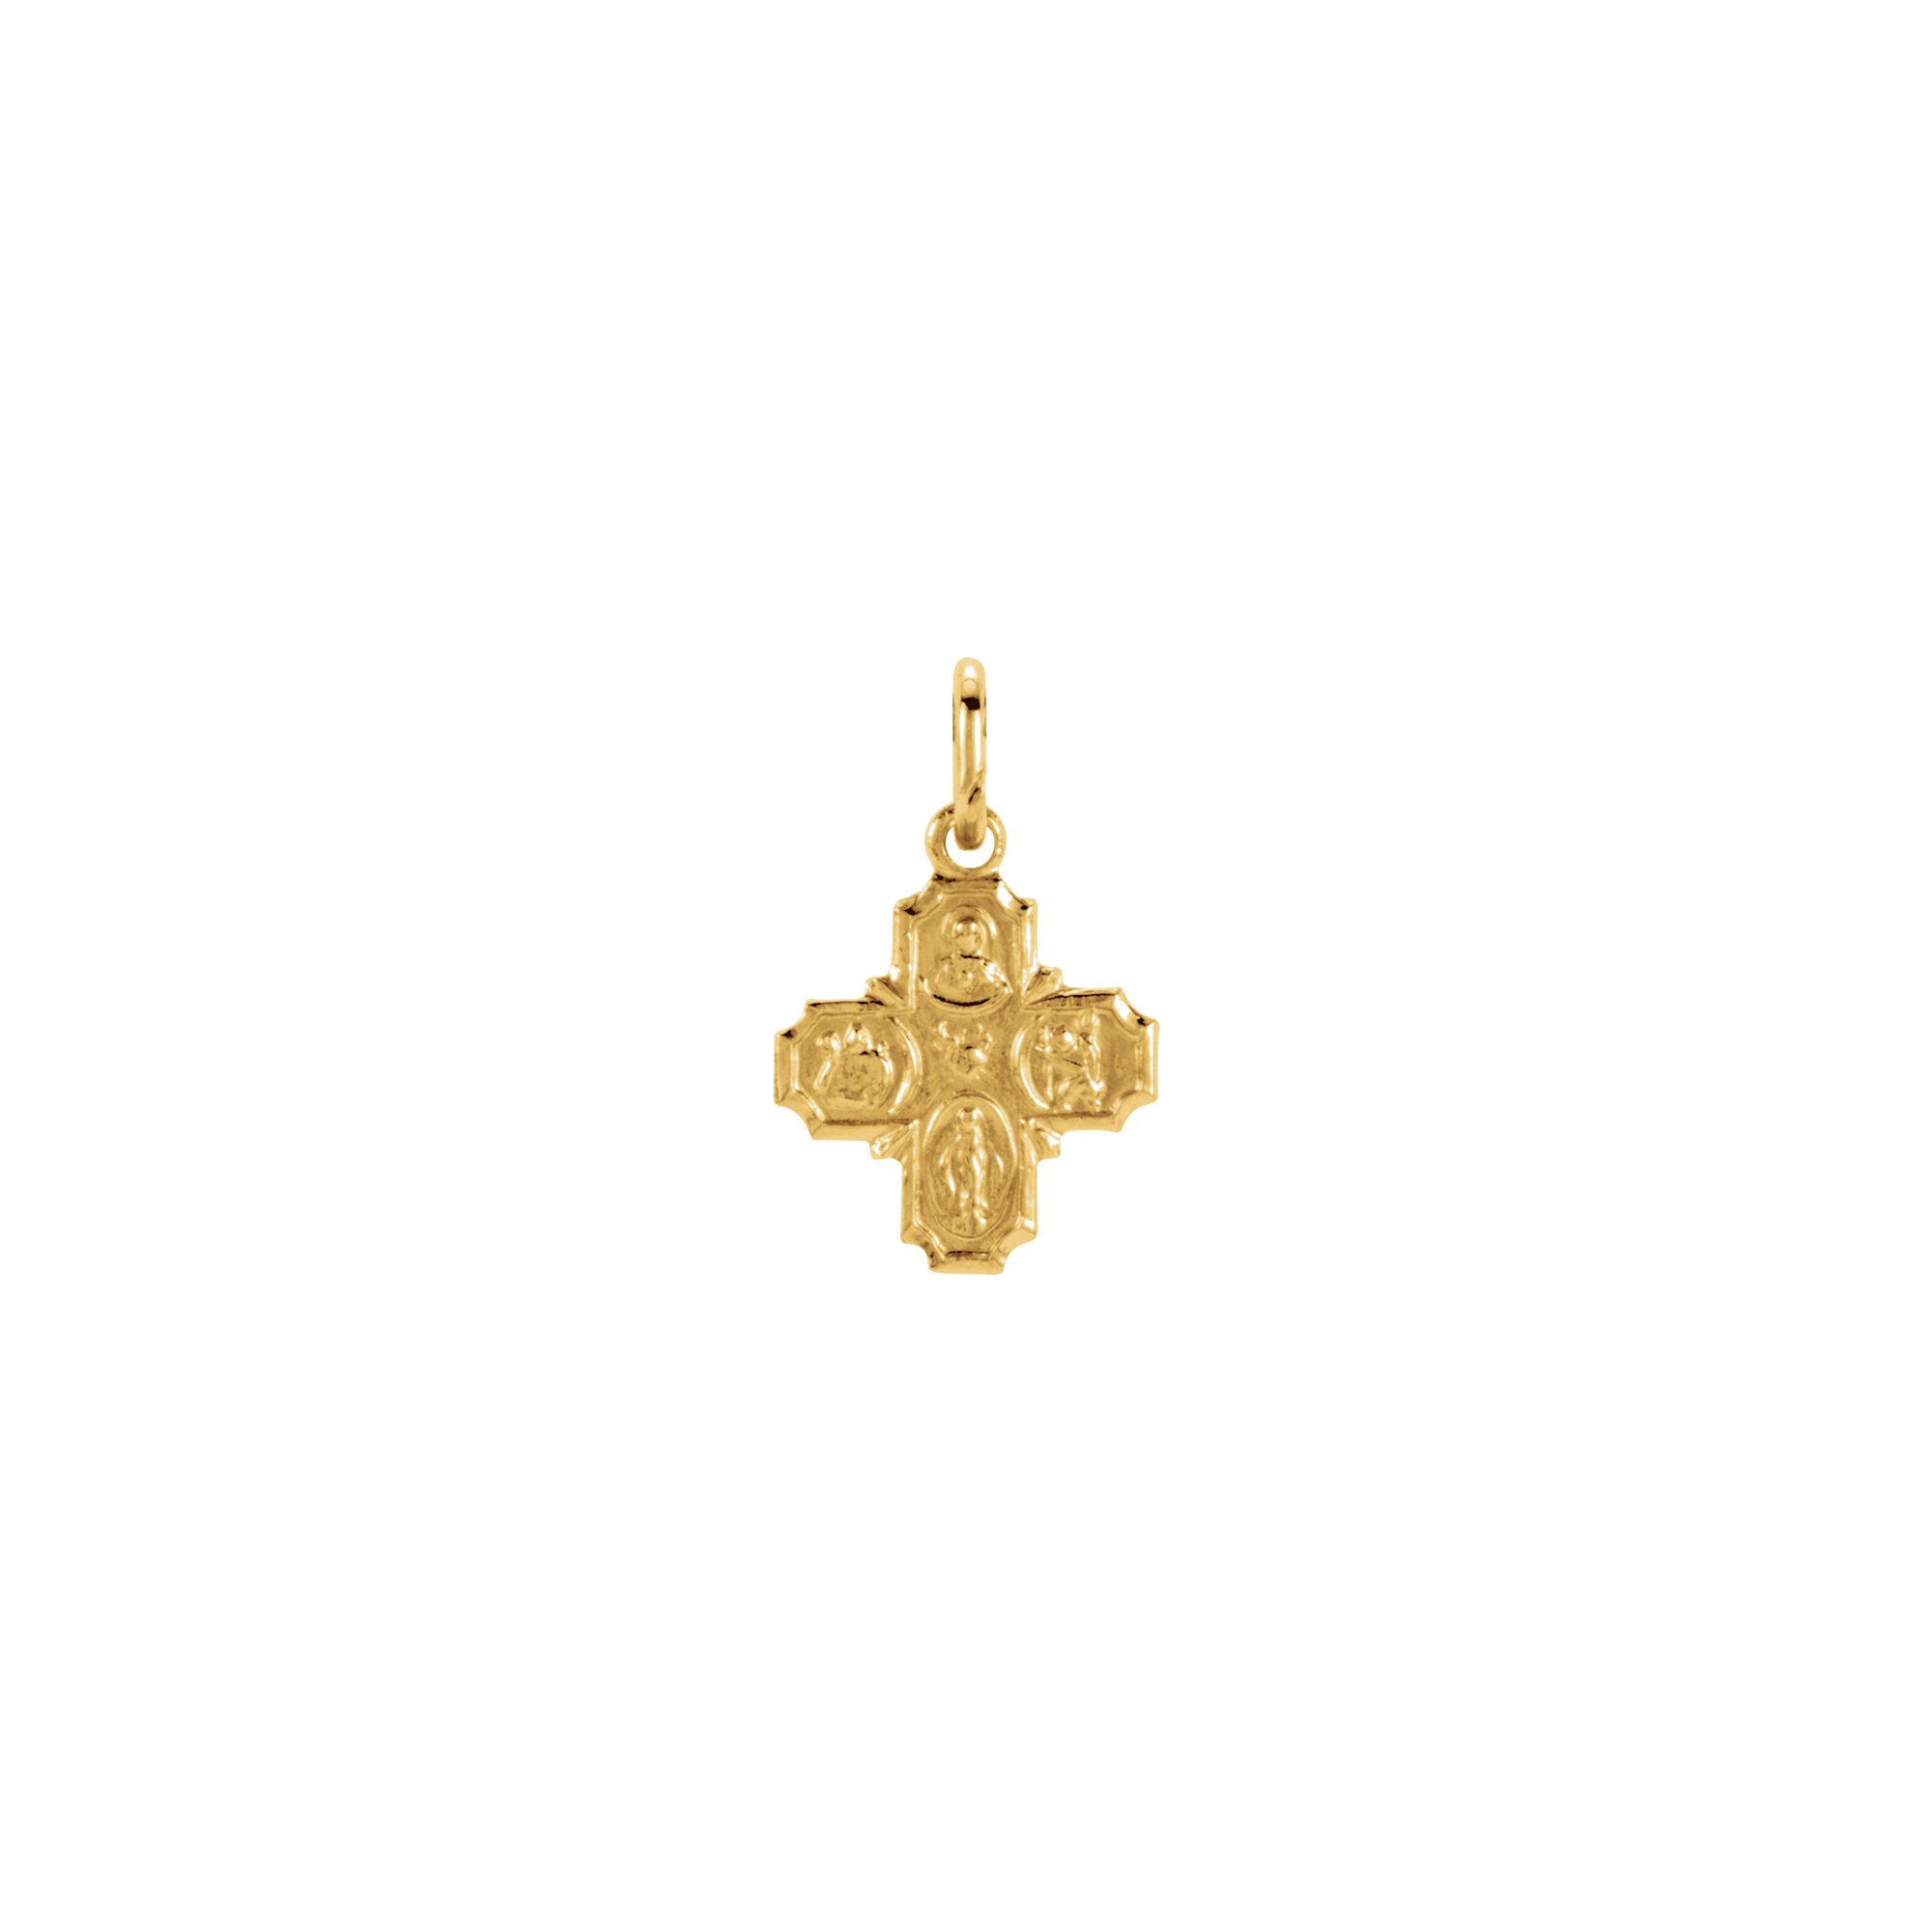 14kt Yellow Gold 8x8mm Four-Way Cross Medal | The Catholic Company®